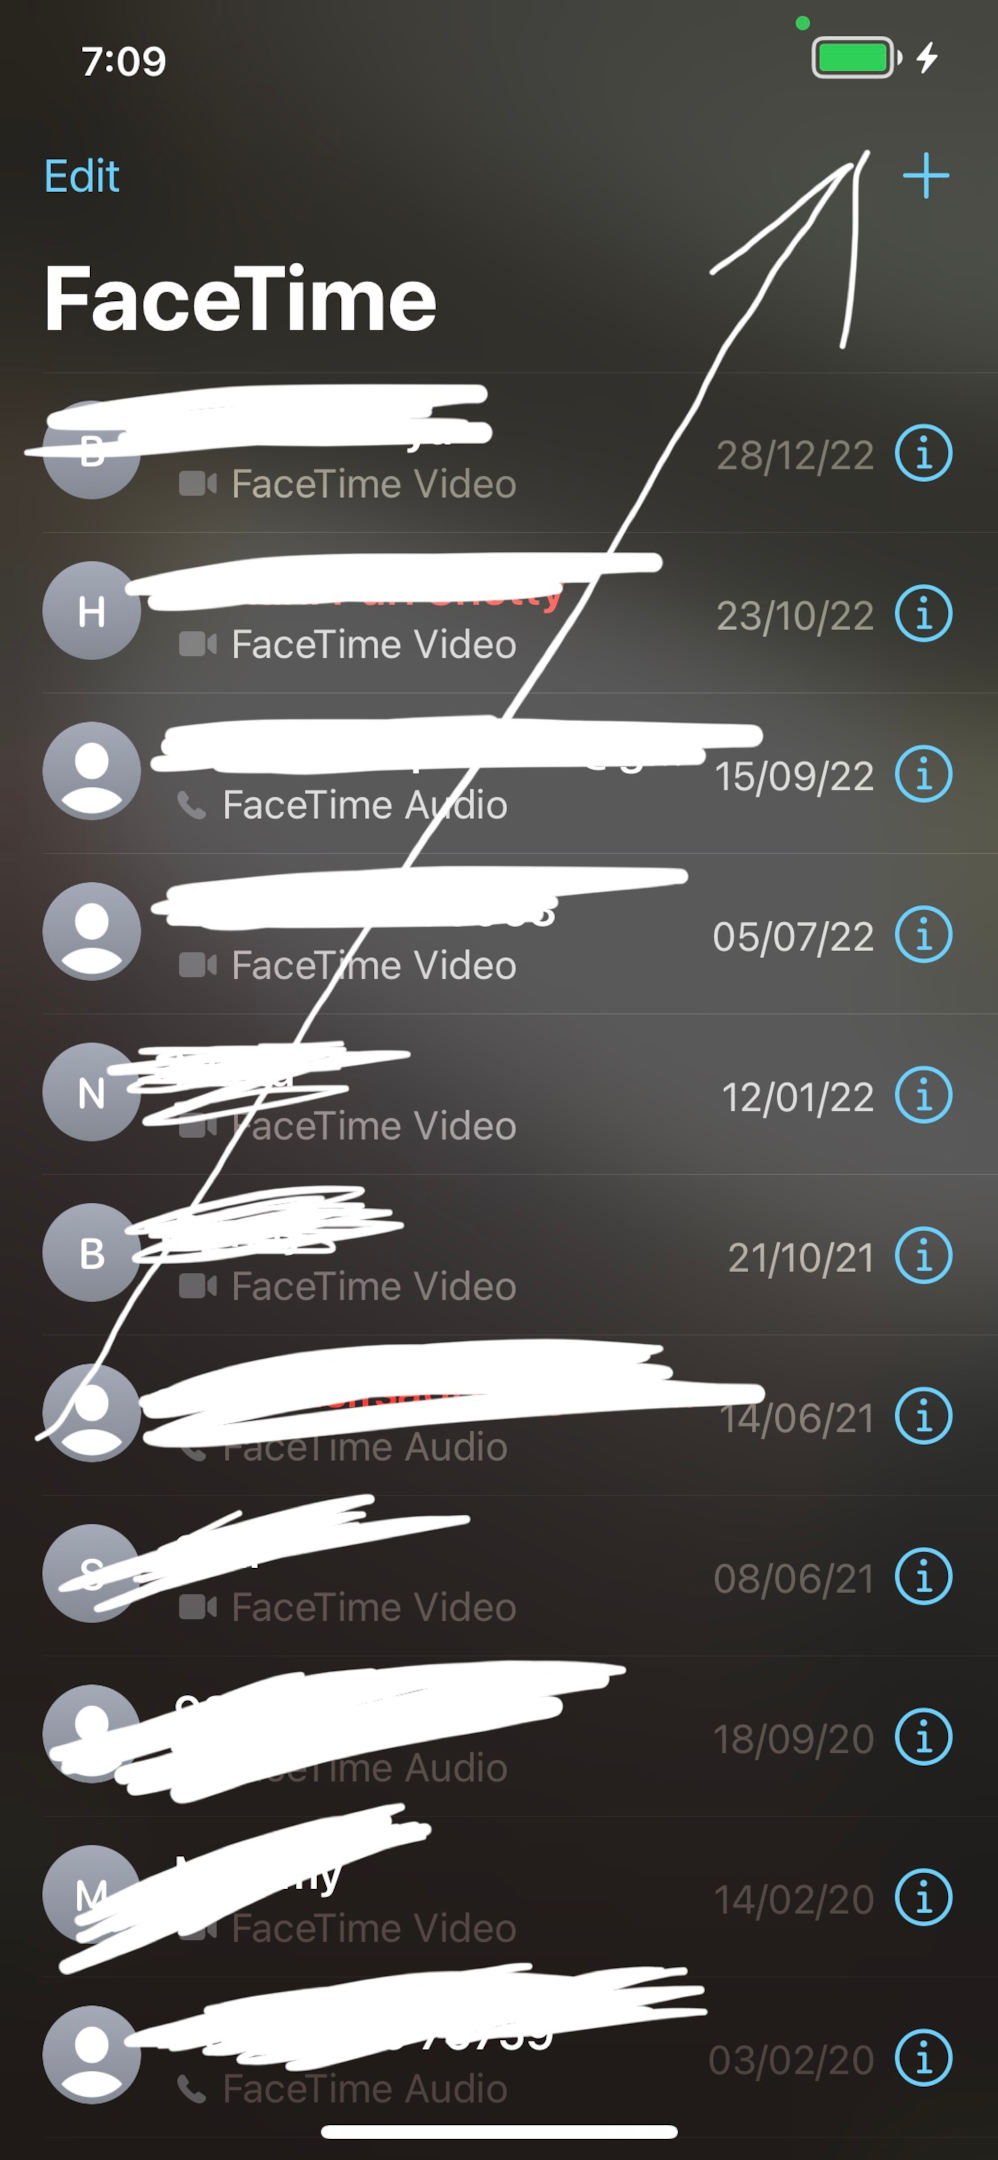 What was Guinness world record for the longest facetime call?